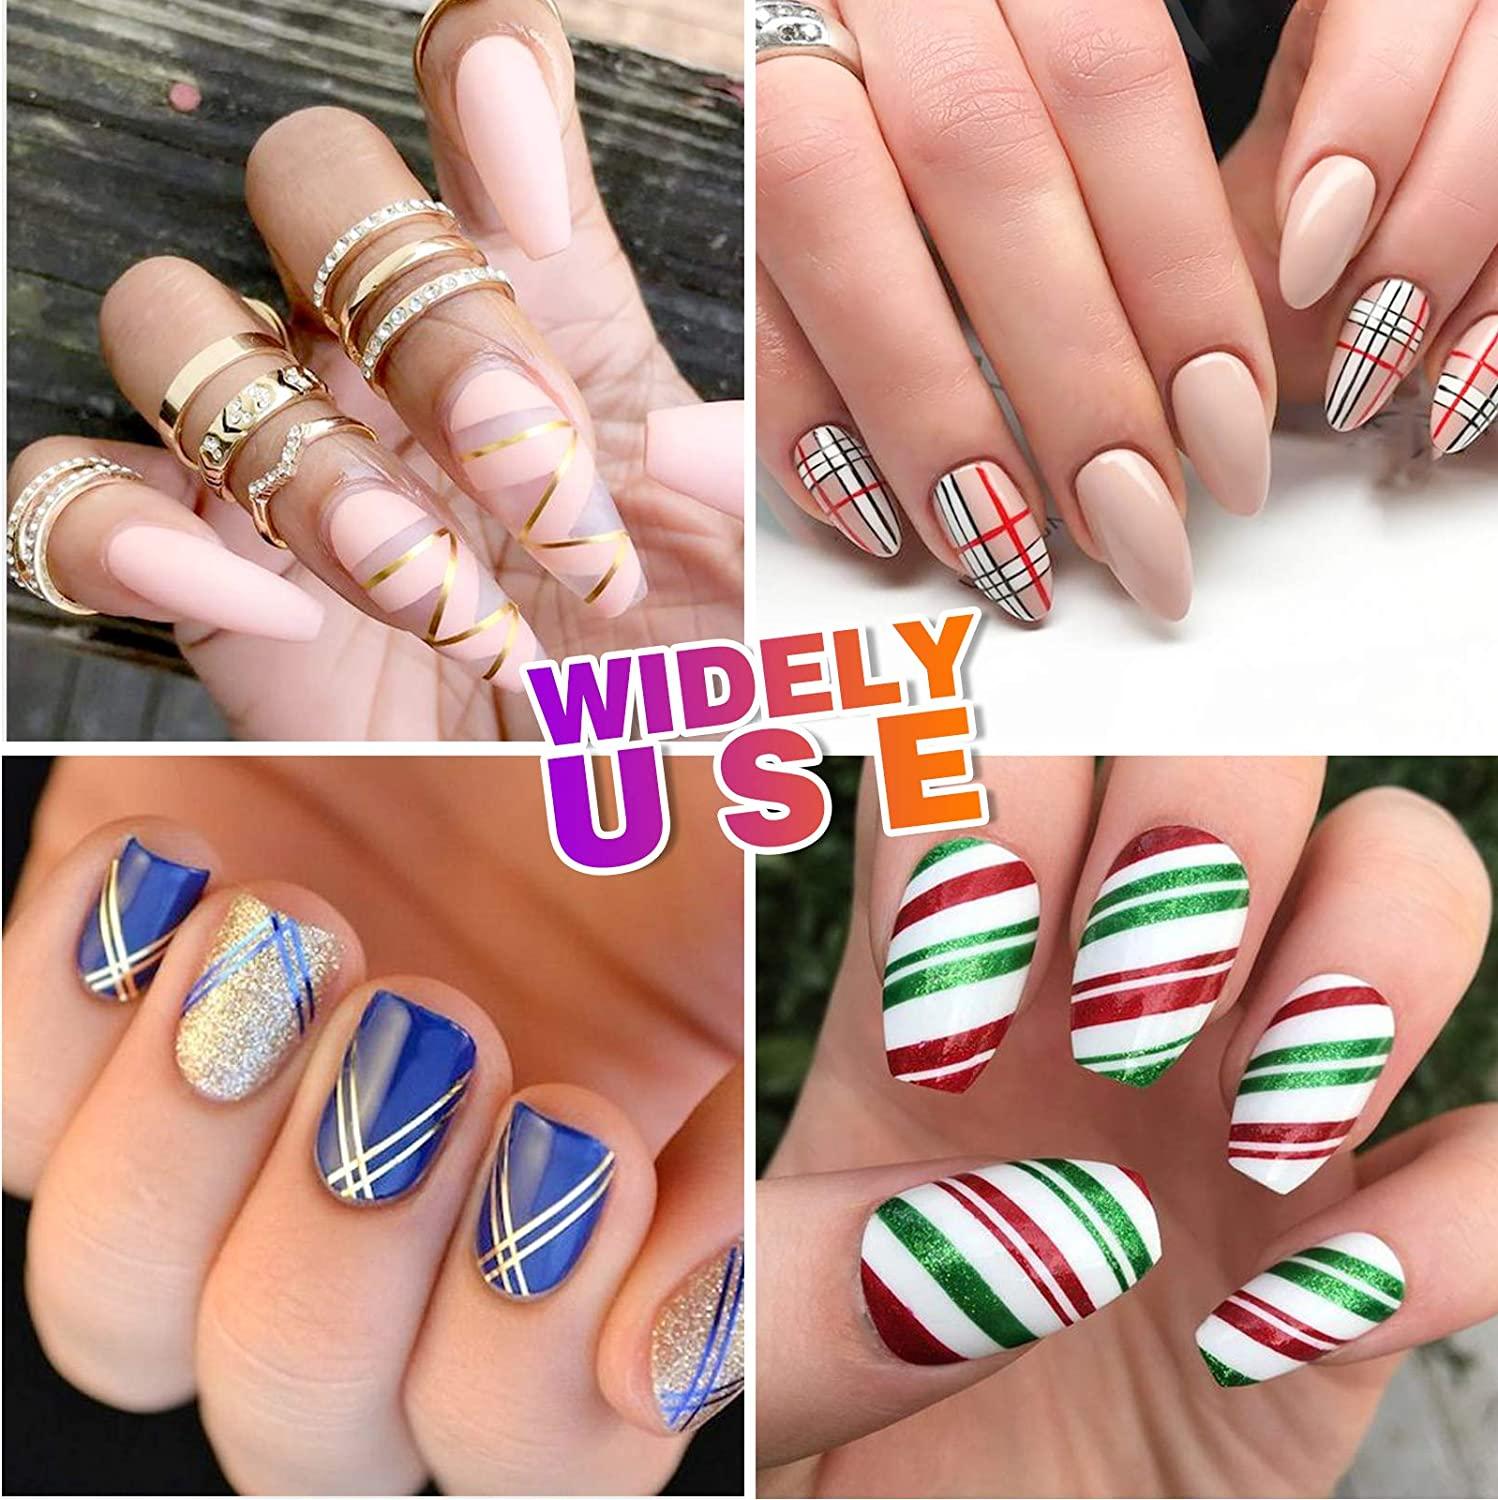 64 Rolls Nail Striping Tape Line, FANDAMEI 32 Colors Striping Tapes Line  Adhesive Sticker with 2PCS Nail Tape Roller Dispensers, 1PCS Nail Art  Tweezers. Nail Art Decoration Sticker DIY Nail Tip